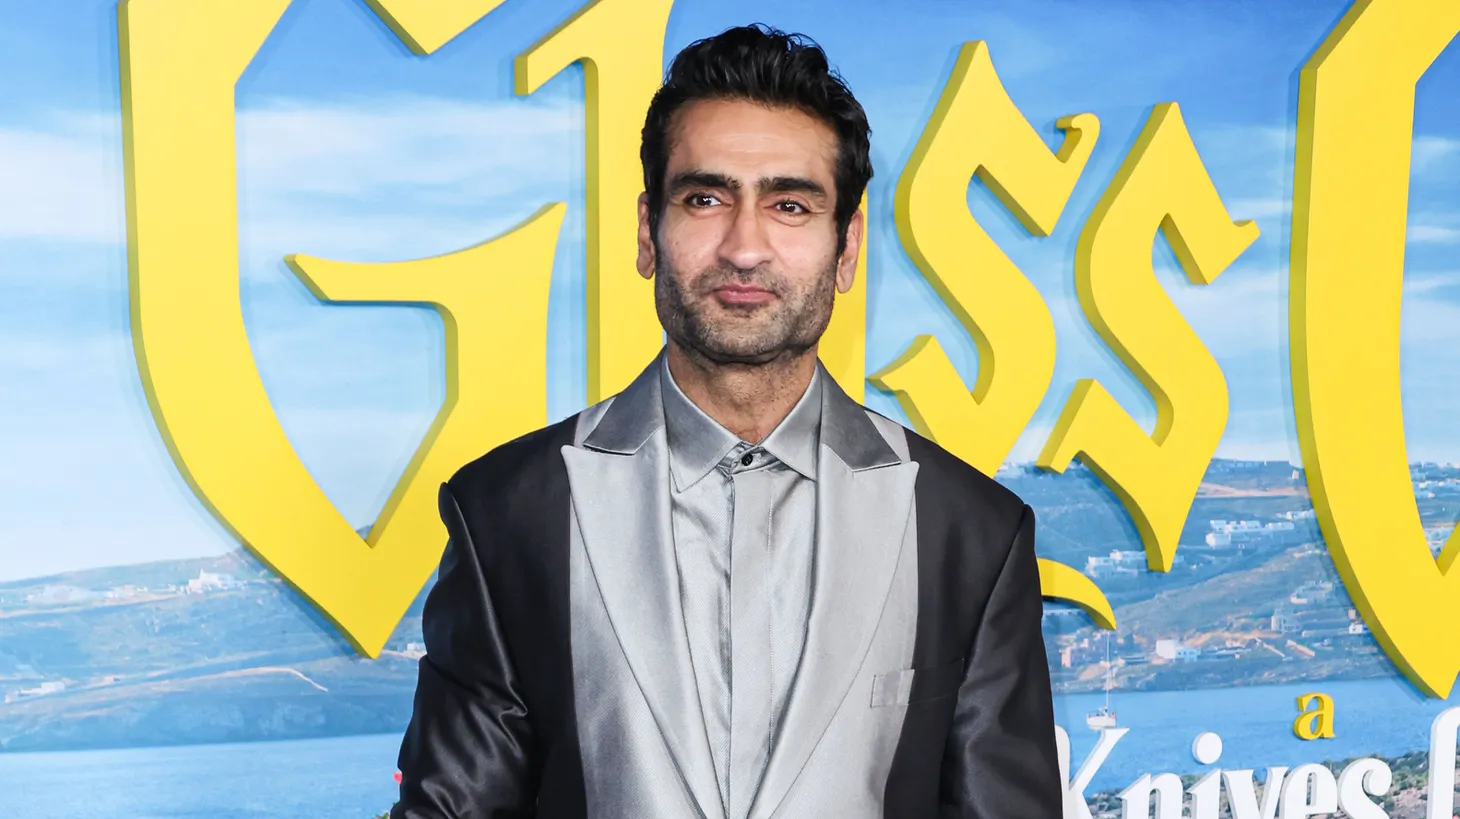 Pakistani-American actor Kumail Nanjiani arrives at the Los Angeles Premiere of Netflix's “Glass Onion: A Knives Out Mystery” held at the Academy Museum of Motion Pictures in Los Angeles, on November 14, 2022.